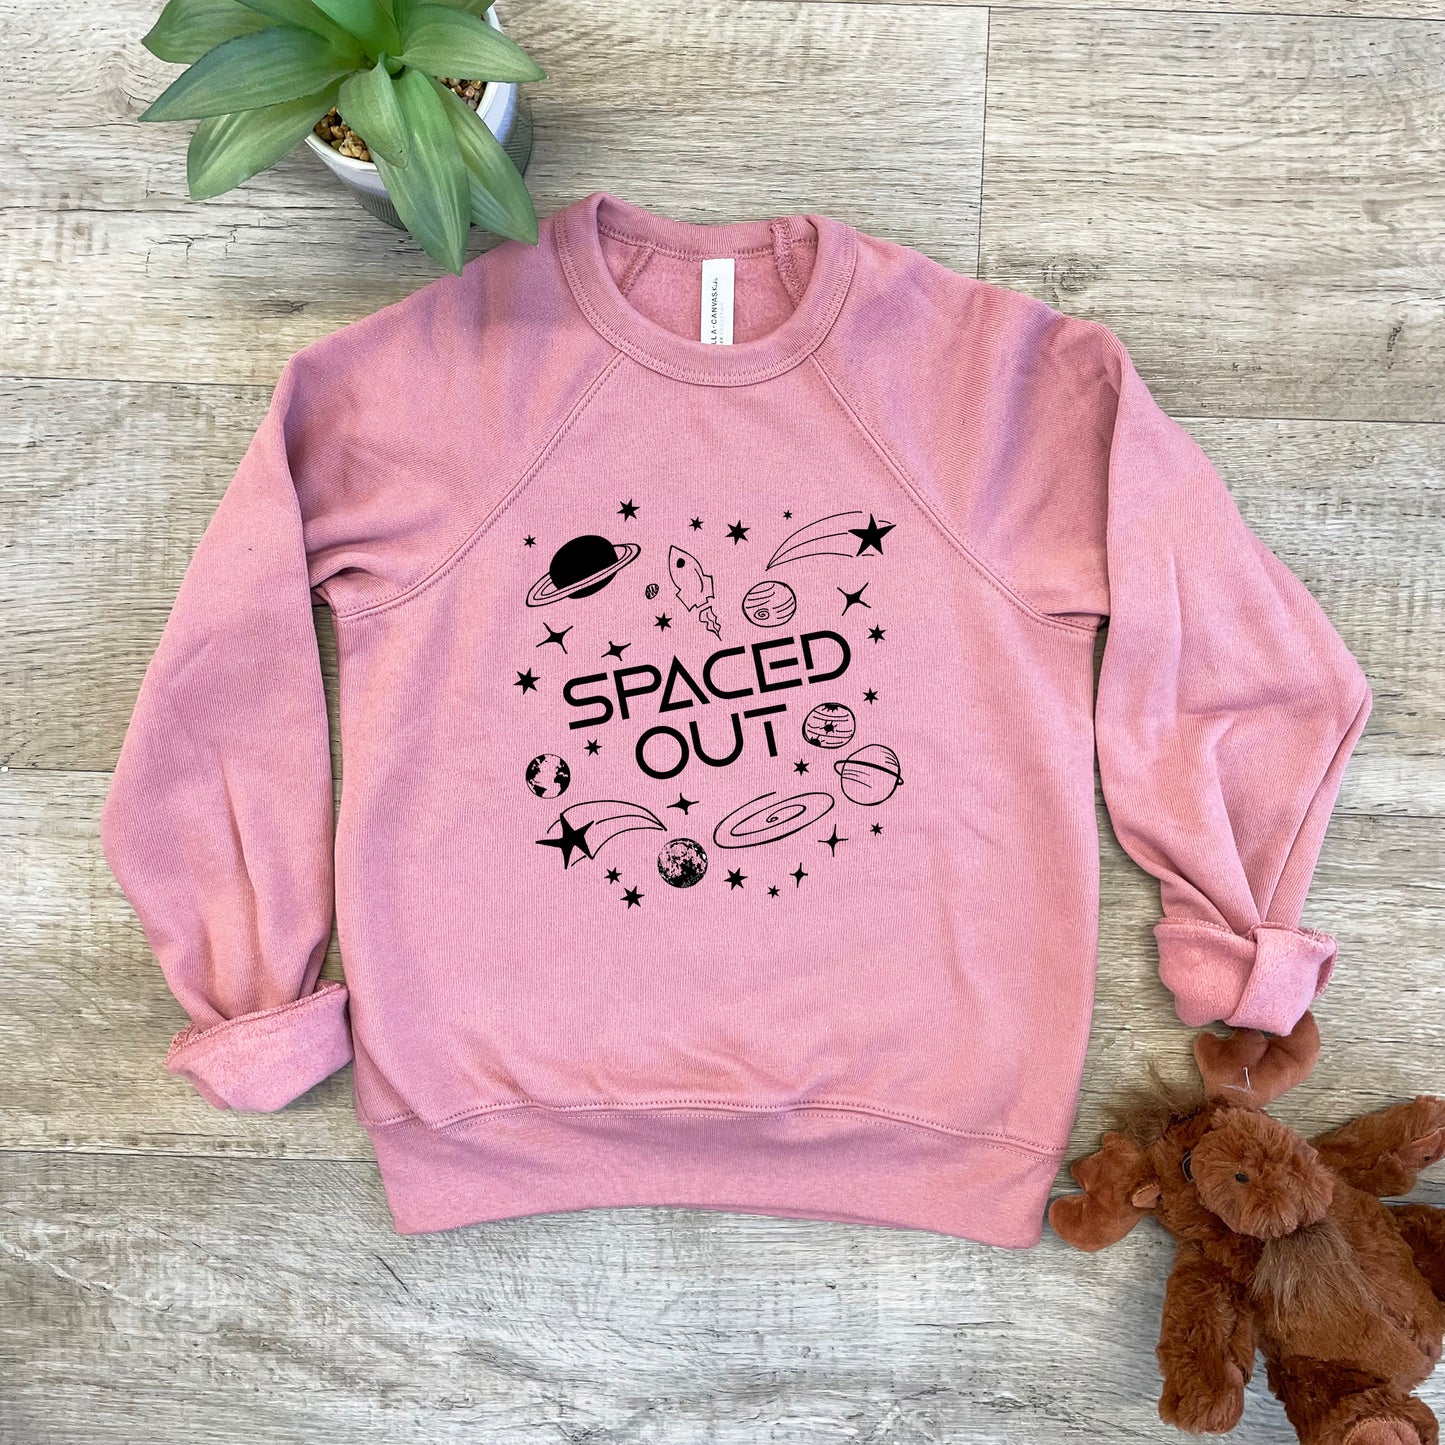 Spaced Out - Kid's Sweatshirt - Heather Gray or Mauve